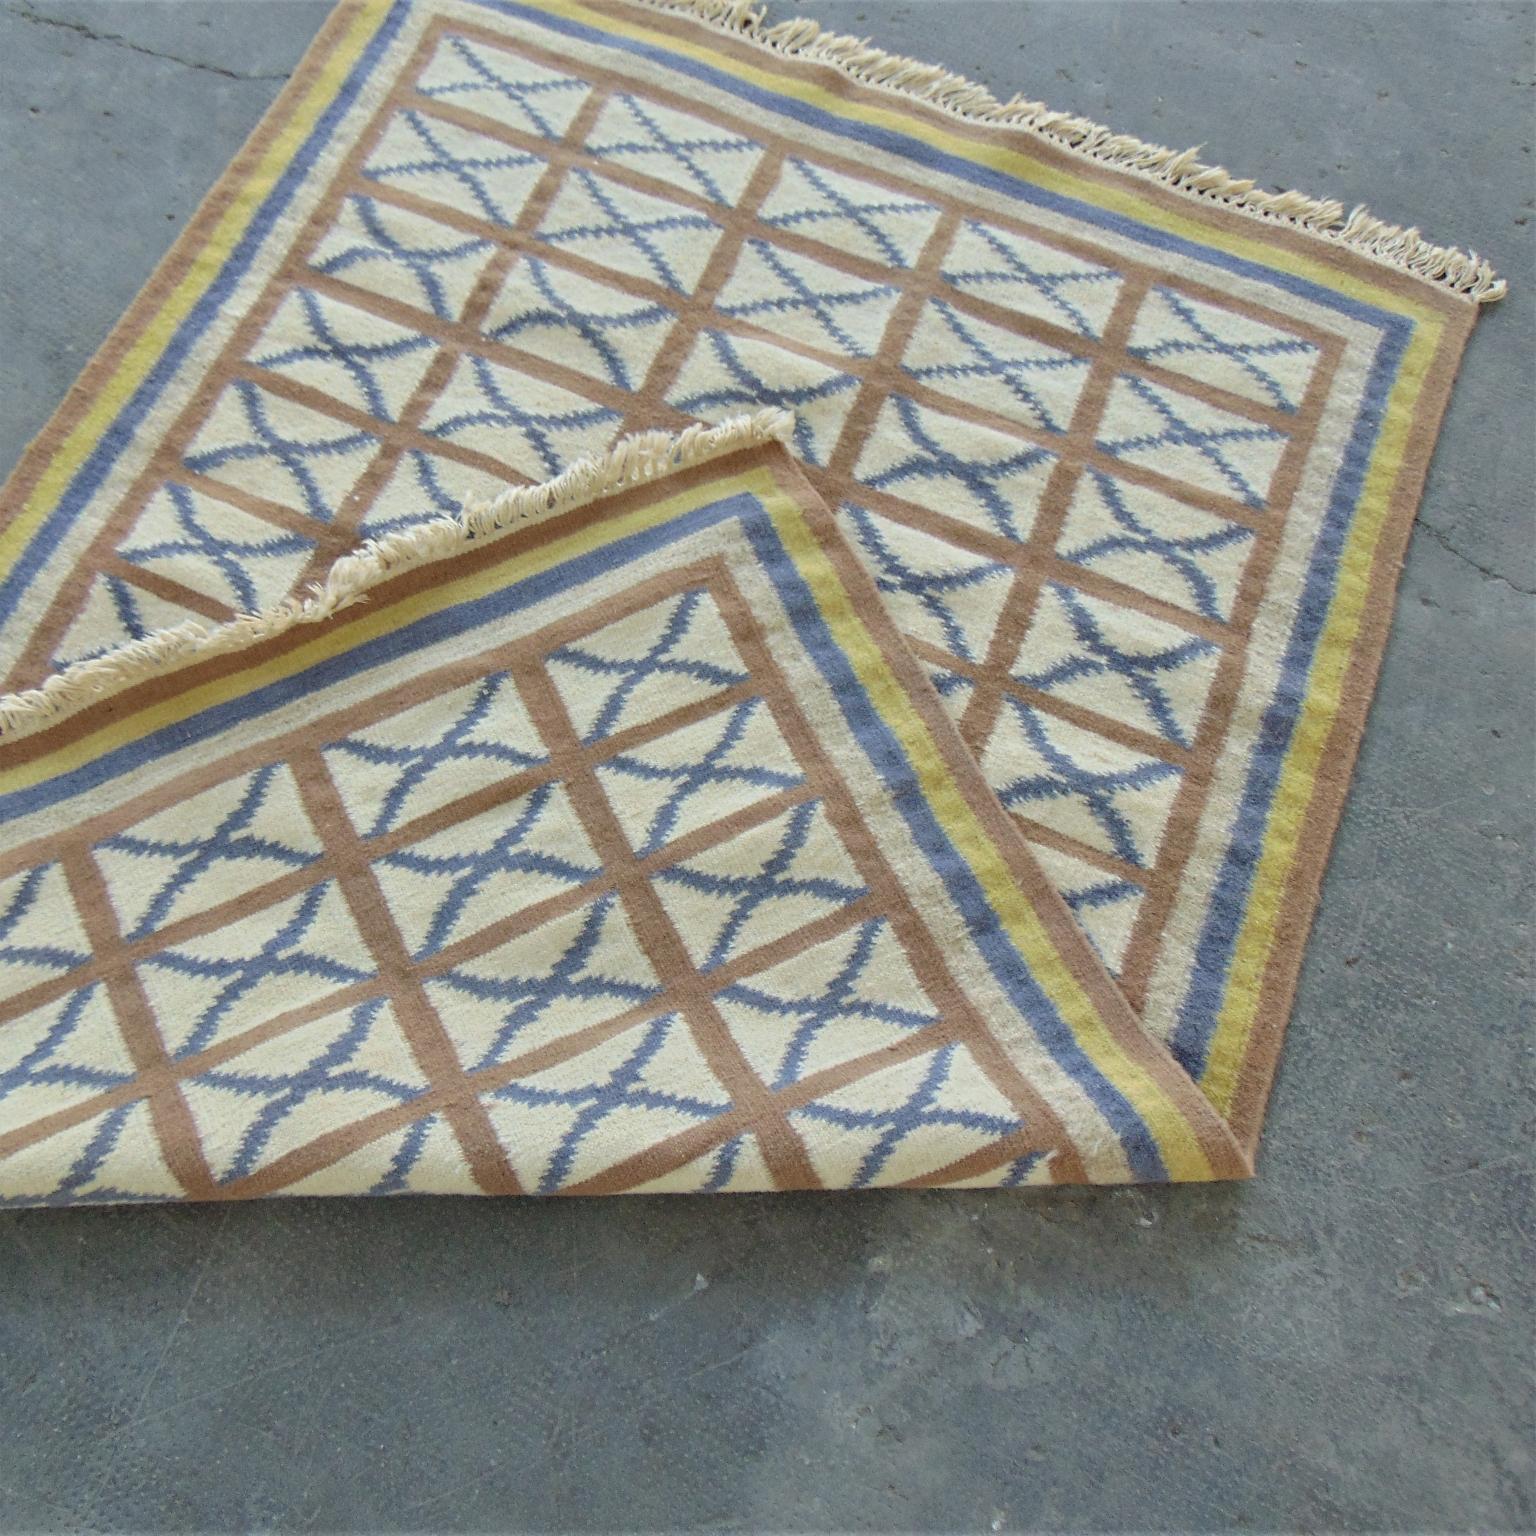 1975 Handwoven Kilim Vintage Indian Rug Blue Brown Yellow Ivory Background India For Sale 1